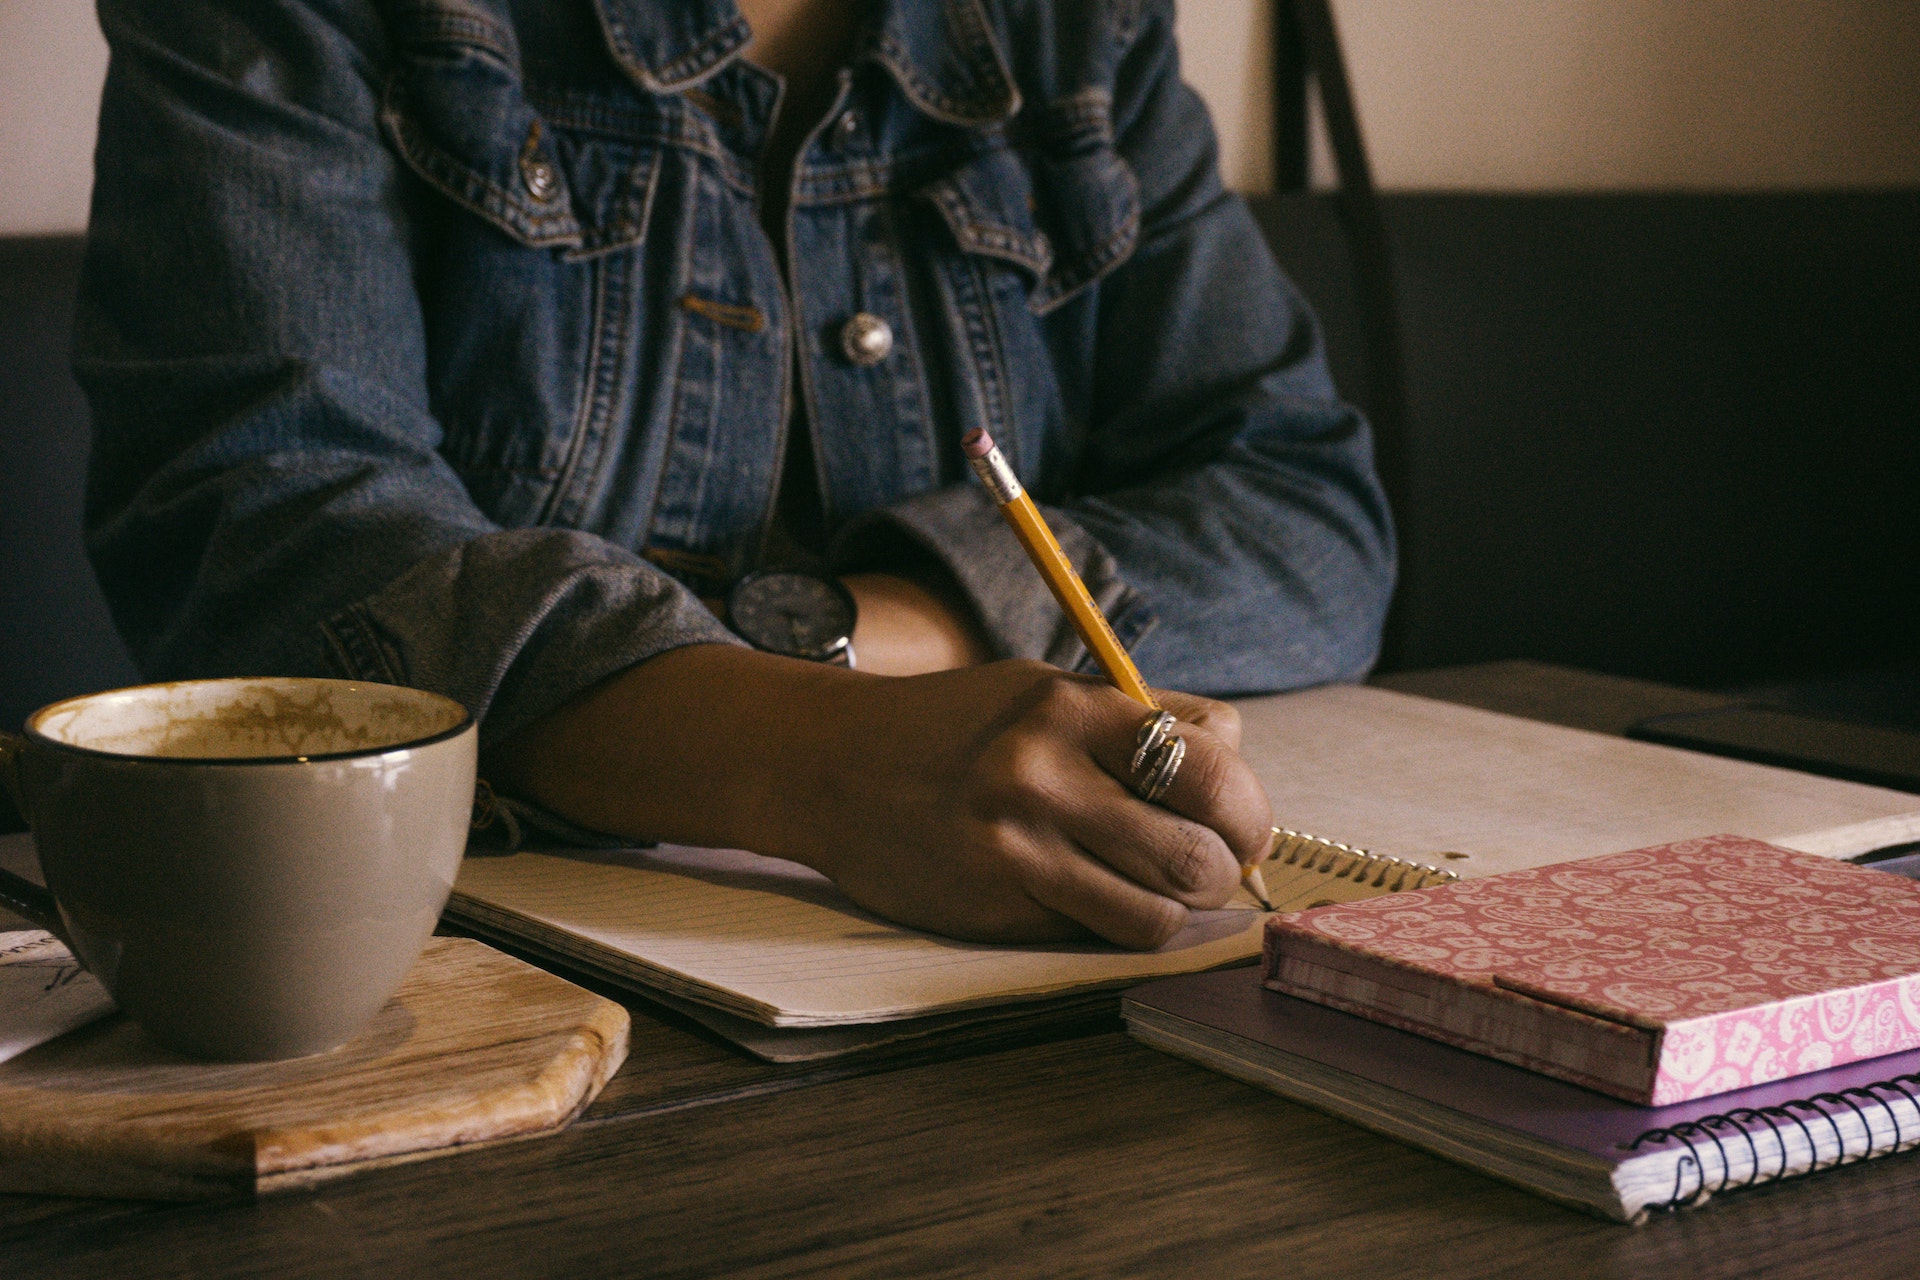 5 Memoir Writing Exercises To Help You Right Now by @BadRedheadMedia #memoir #writing #exercises